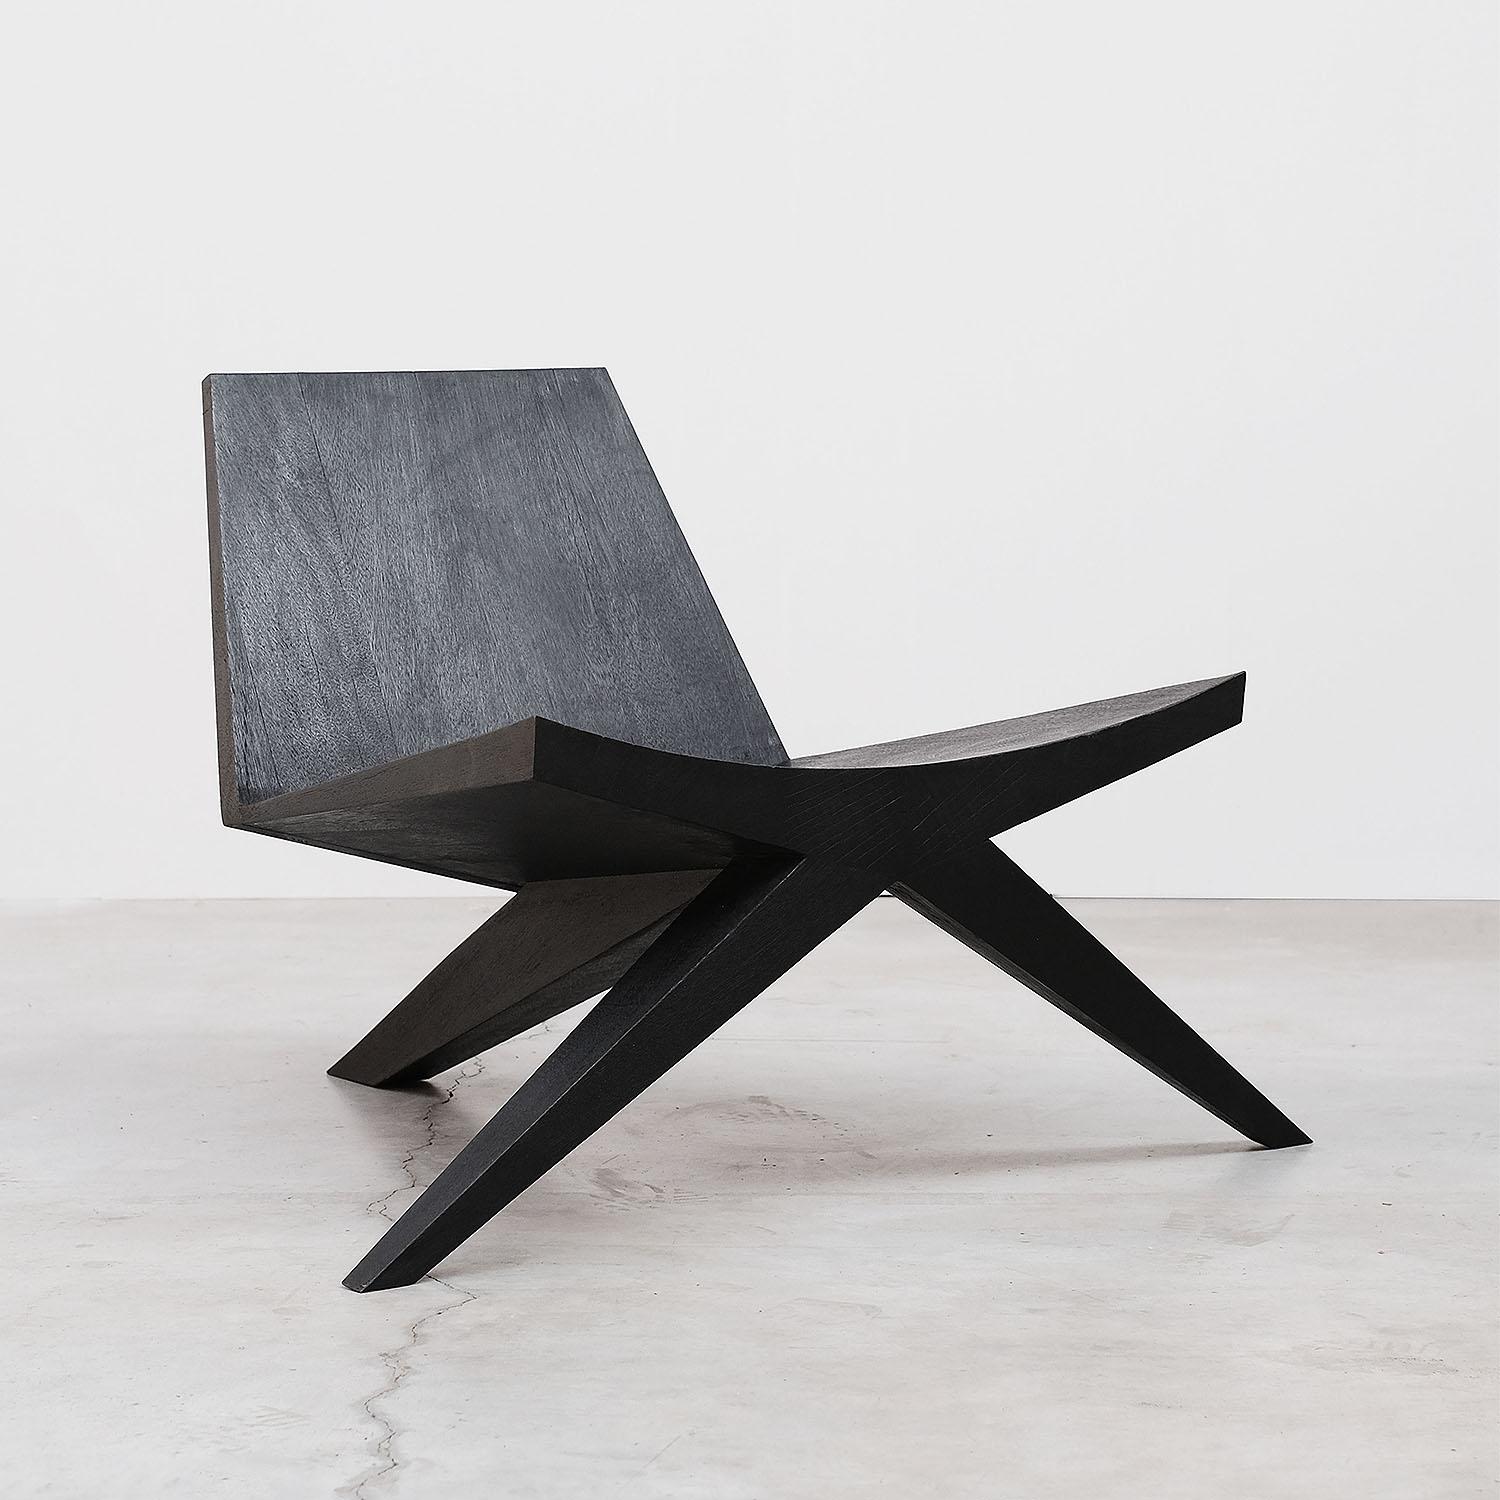 Contemporary lounge chair in Iroko Wood-V-Easy men chair by Arno Declercq

Material: 
Burned and waxed Iroko wood.

Dimensions: 
100 cm W x 90 cm L x 70 cm H
40 ” W x 35,5 ” L x 27,5 ” H

Made by hand, in Belgium.
Crate included in the